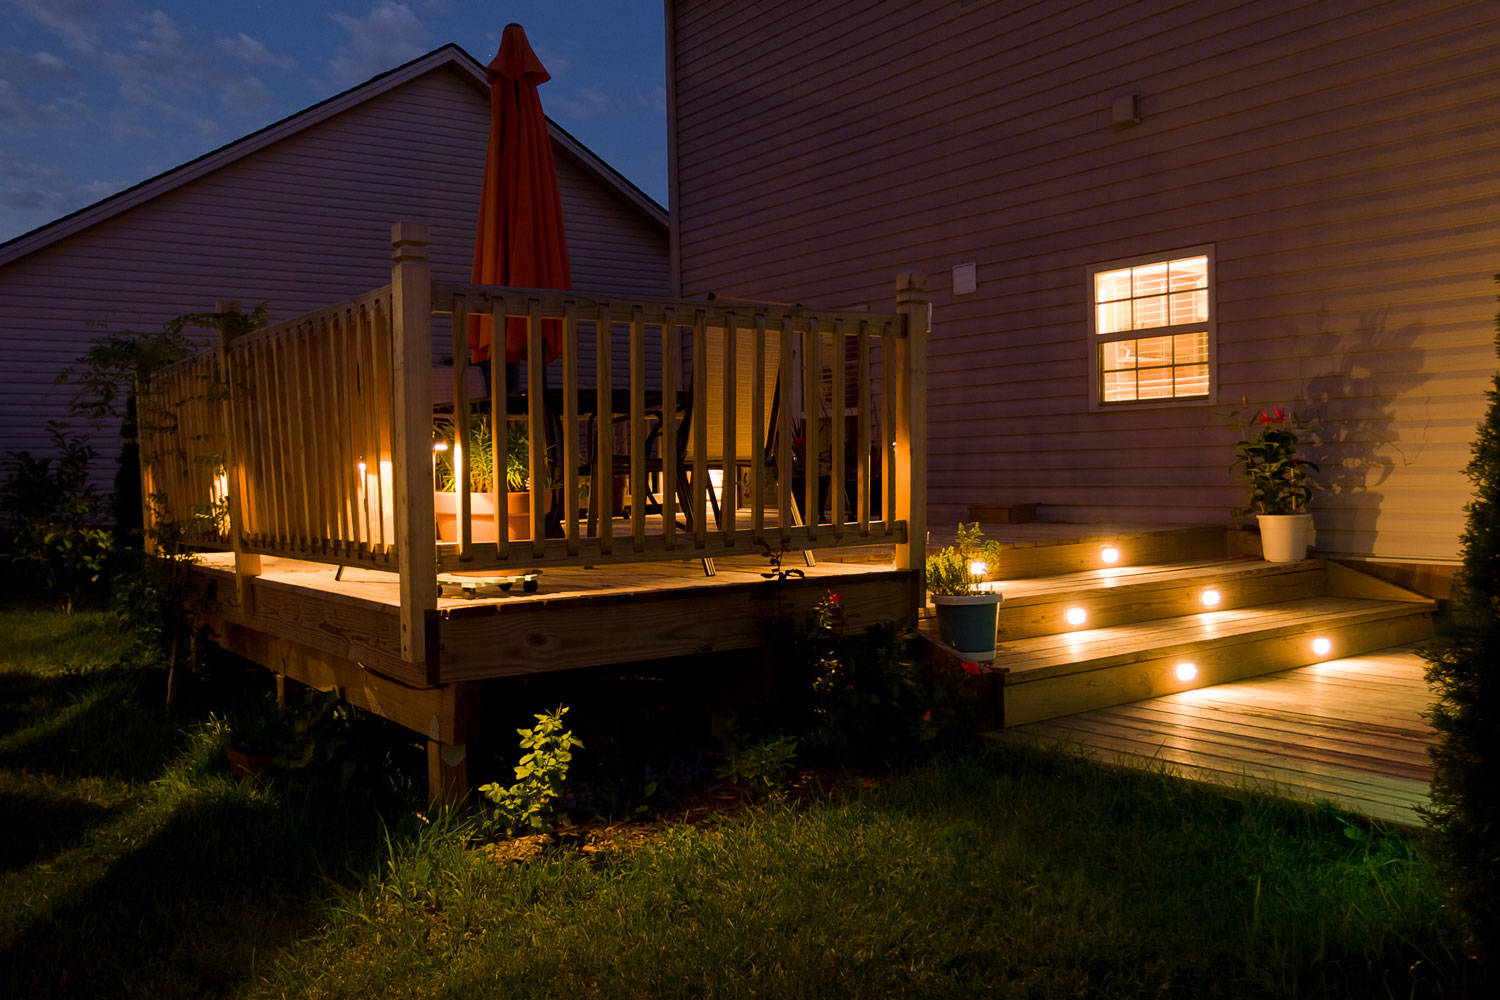 A wooden deck with proper lighting on the side and the stairs